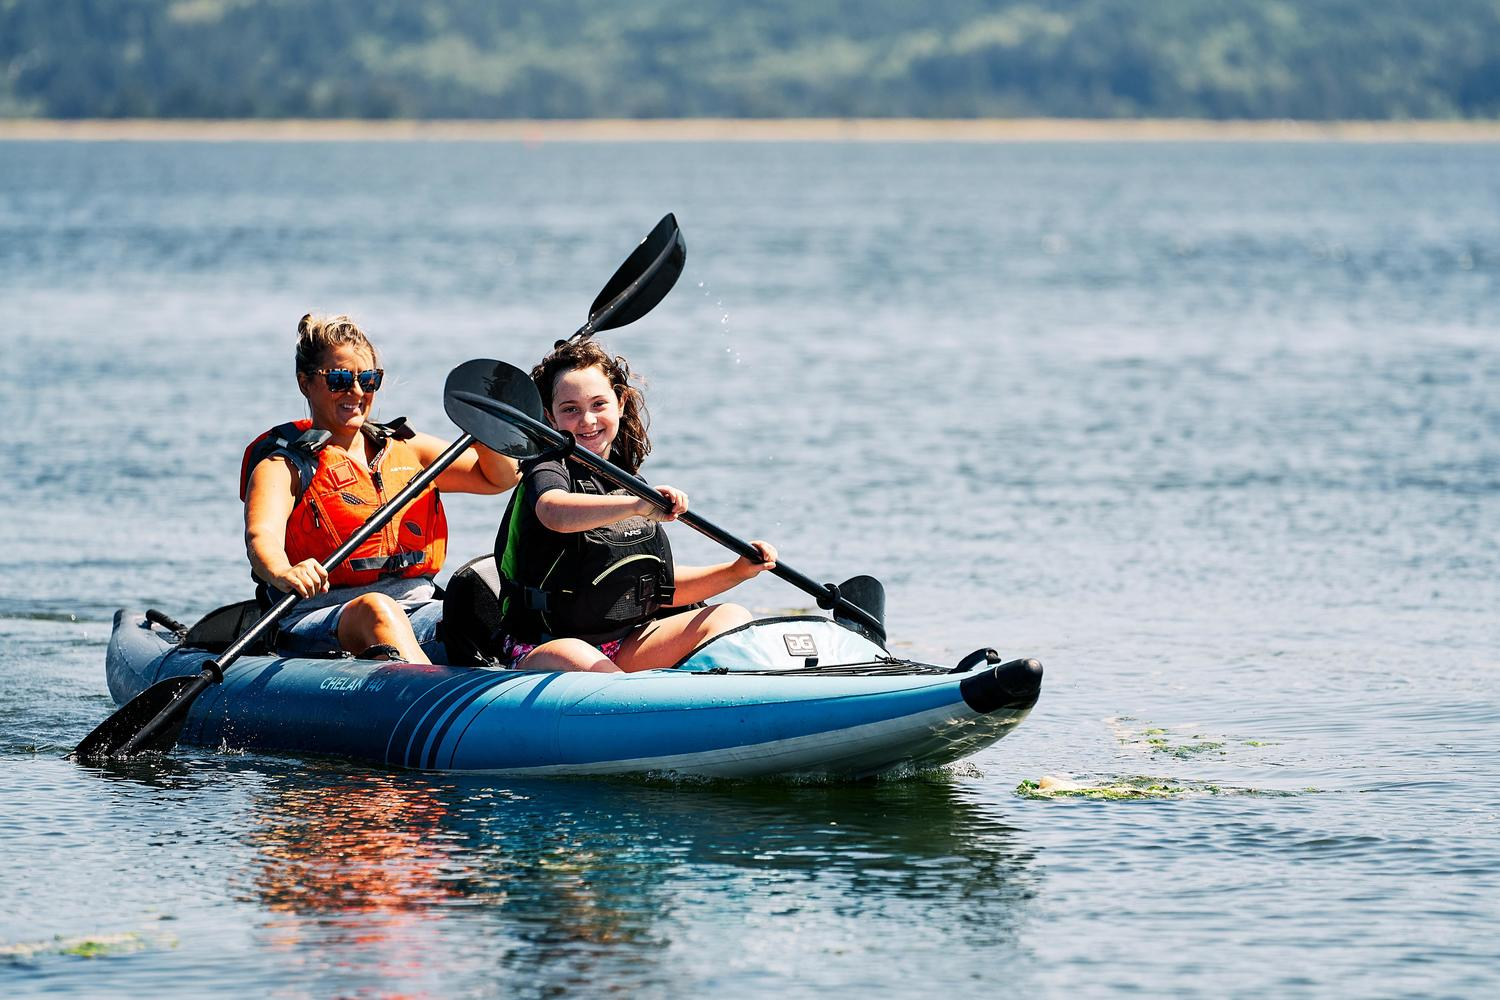 Sneak Preview: New 2021 Aquaglide Chelan Series of Inflatable Touring Kayaks